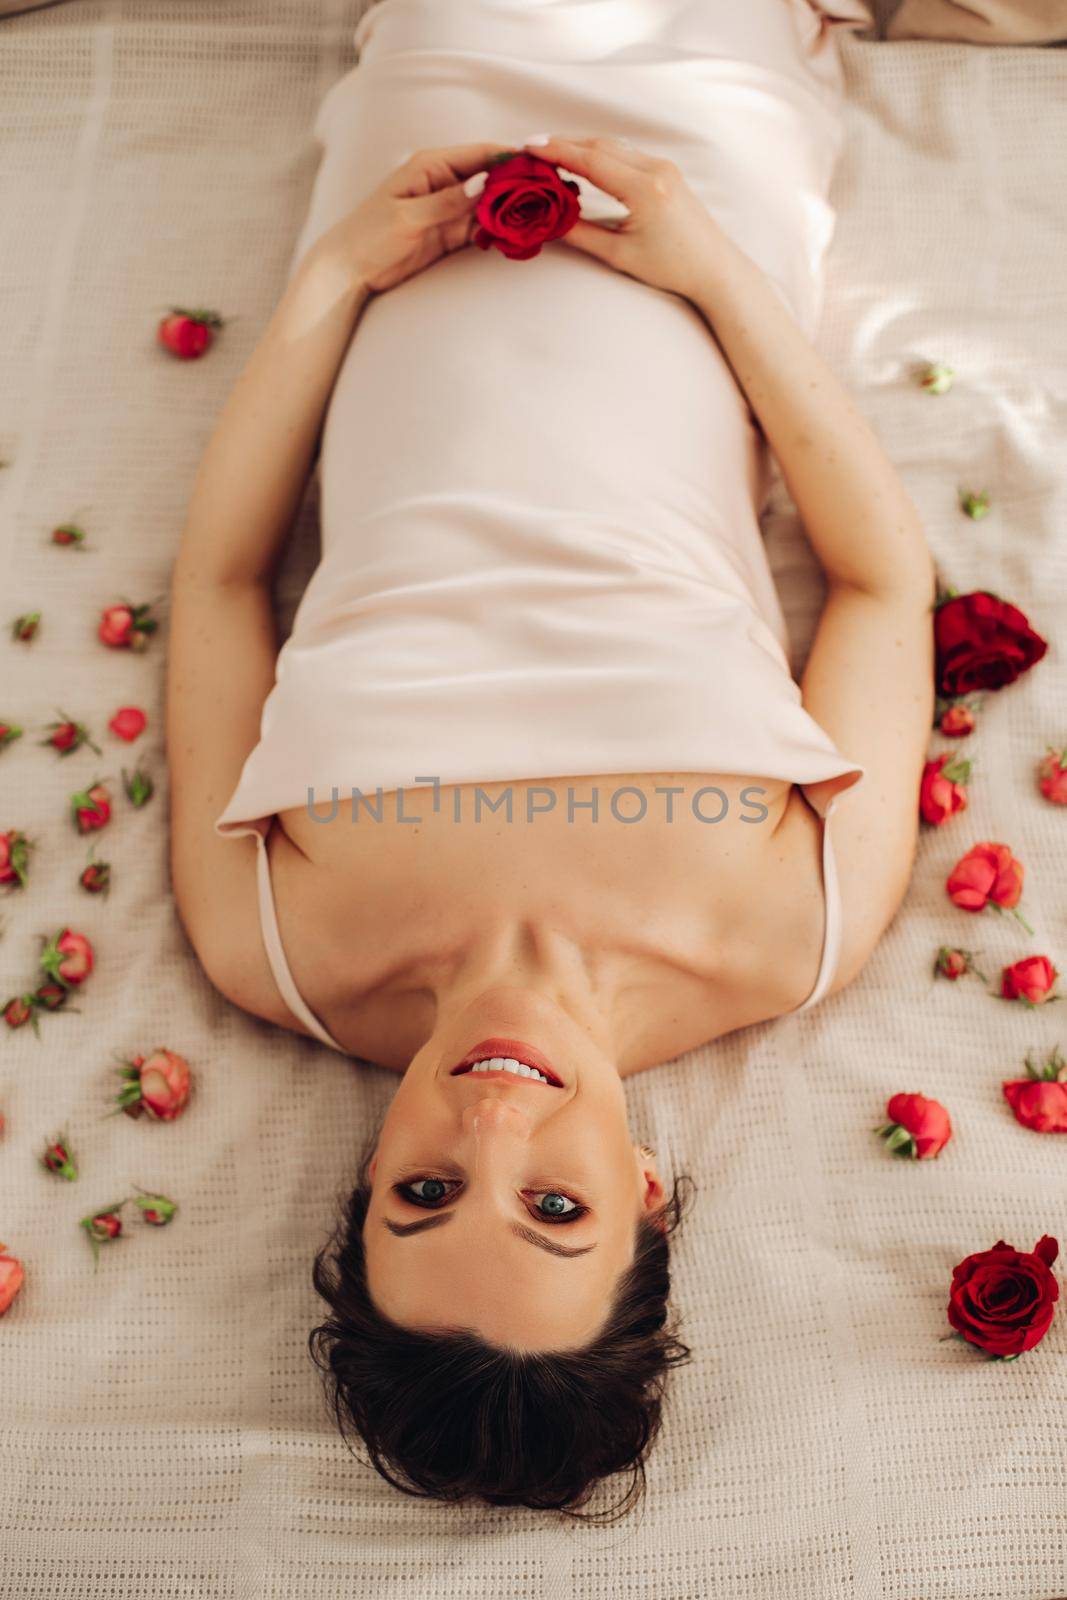 Pregnant woman holds red rose near belly as symbol of new life, wellbeing, fertility. Pregnancy, maternity, gynecology by StudioLucky